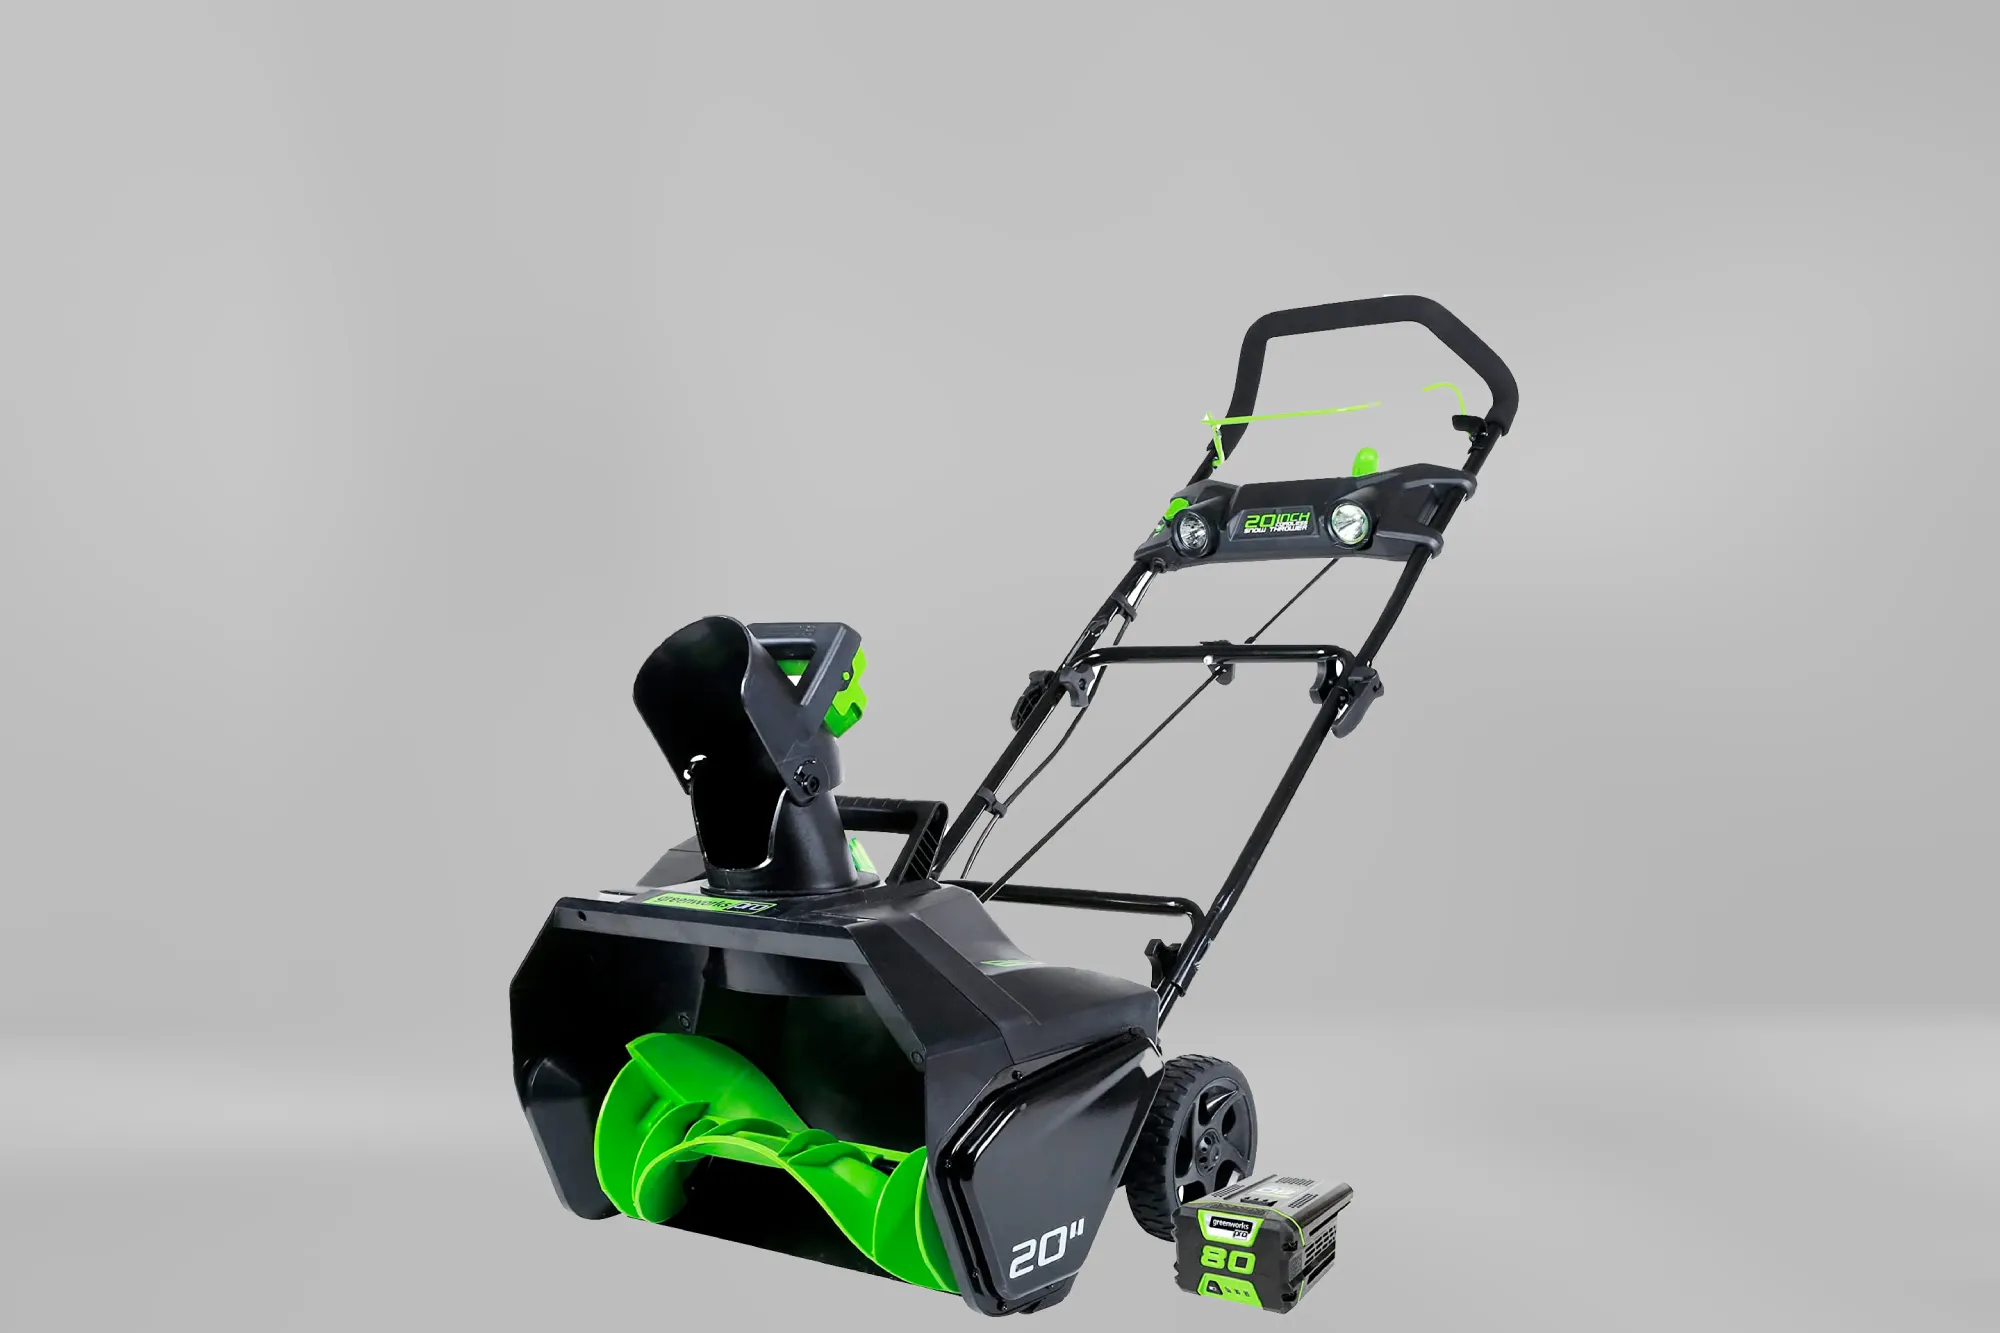 Best Commercial Snow Blowers for Heavy-Duty Snow Removal